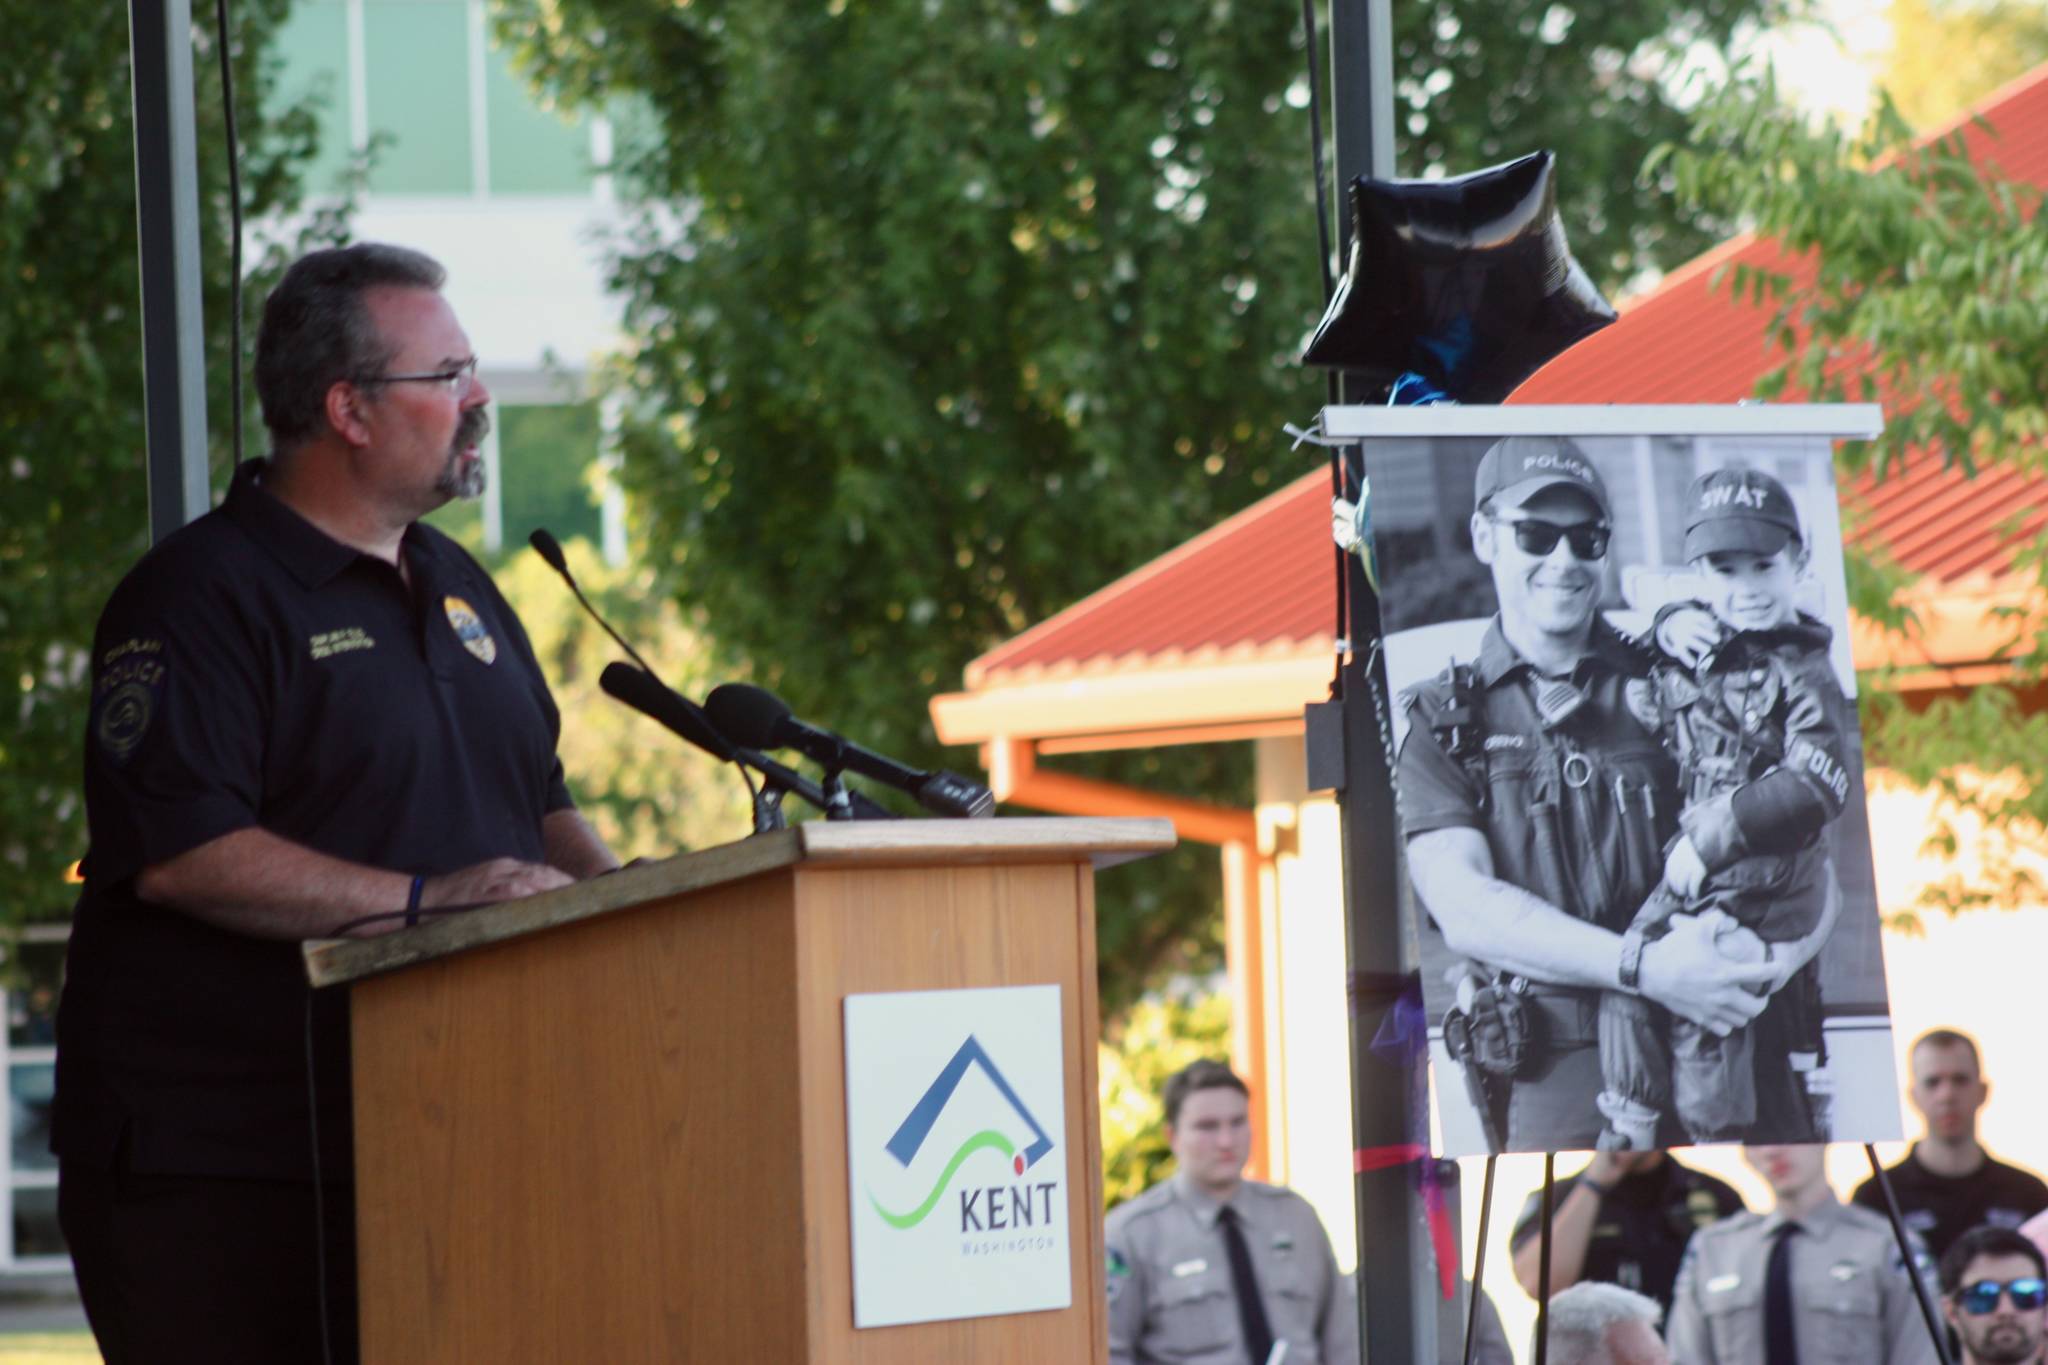 Kent Police chaplain Pat Ellis tells the gathering that Diego Moreno’s “life had purpose, and he lived that purpose every day. That purpose was not only his family, but it was you.” MARK KLAAS, Kent Reporter